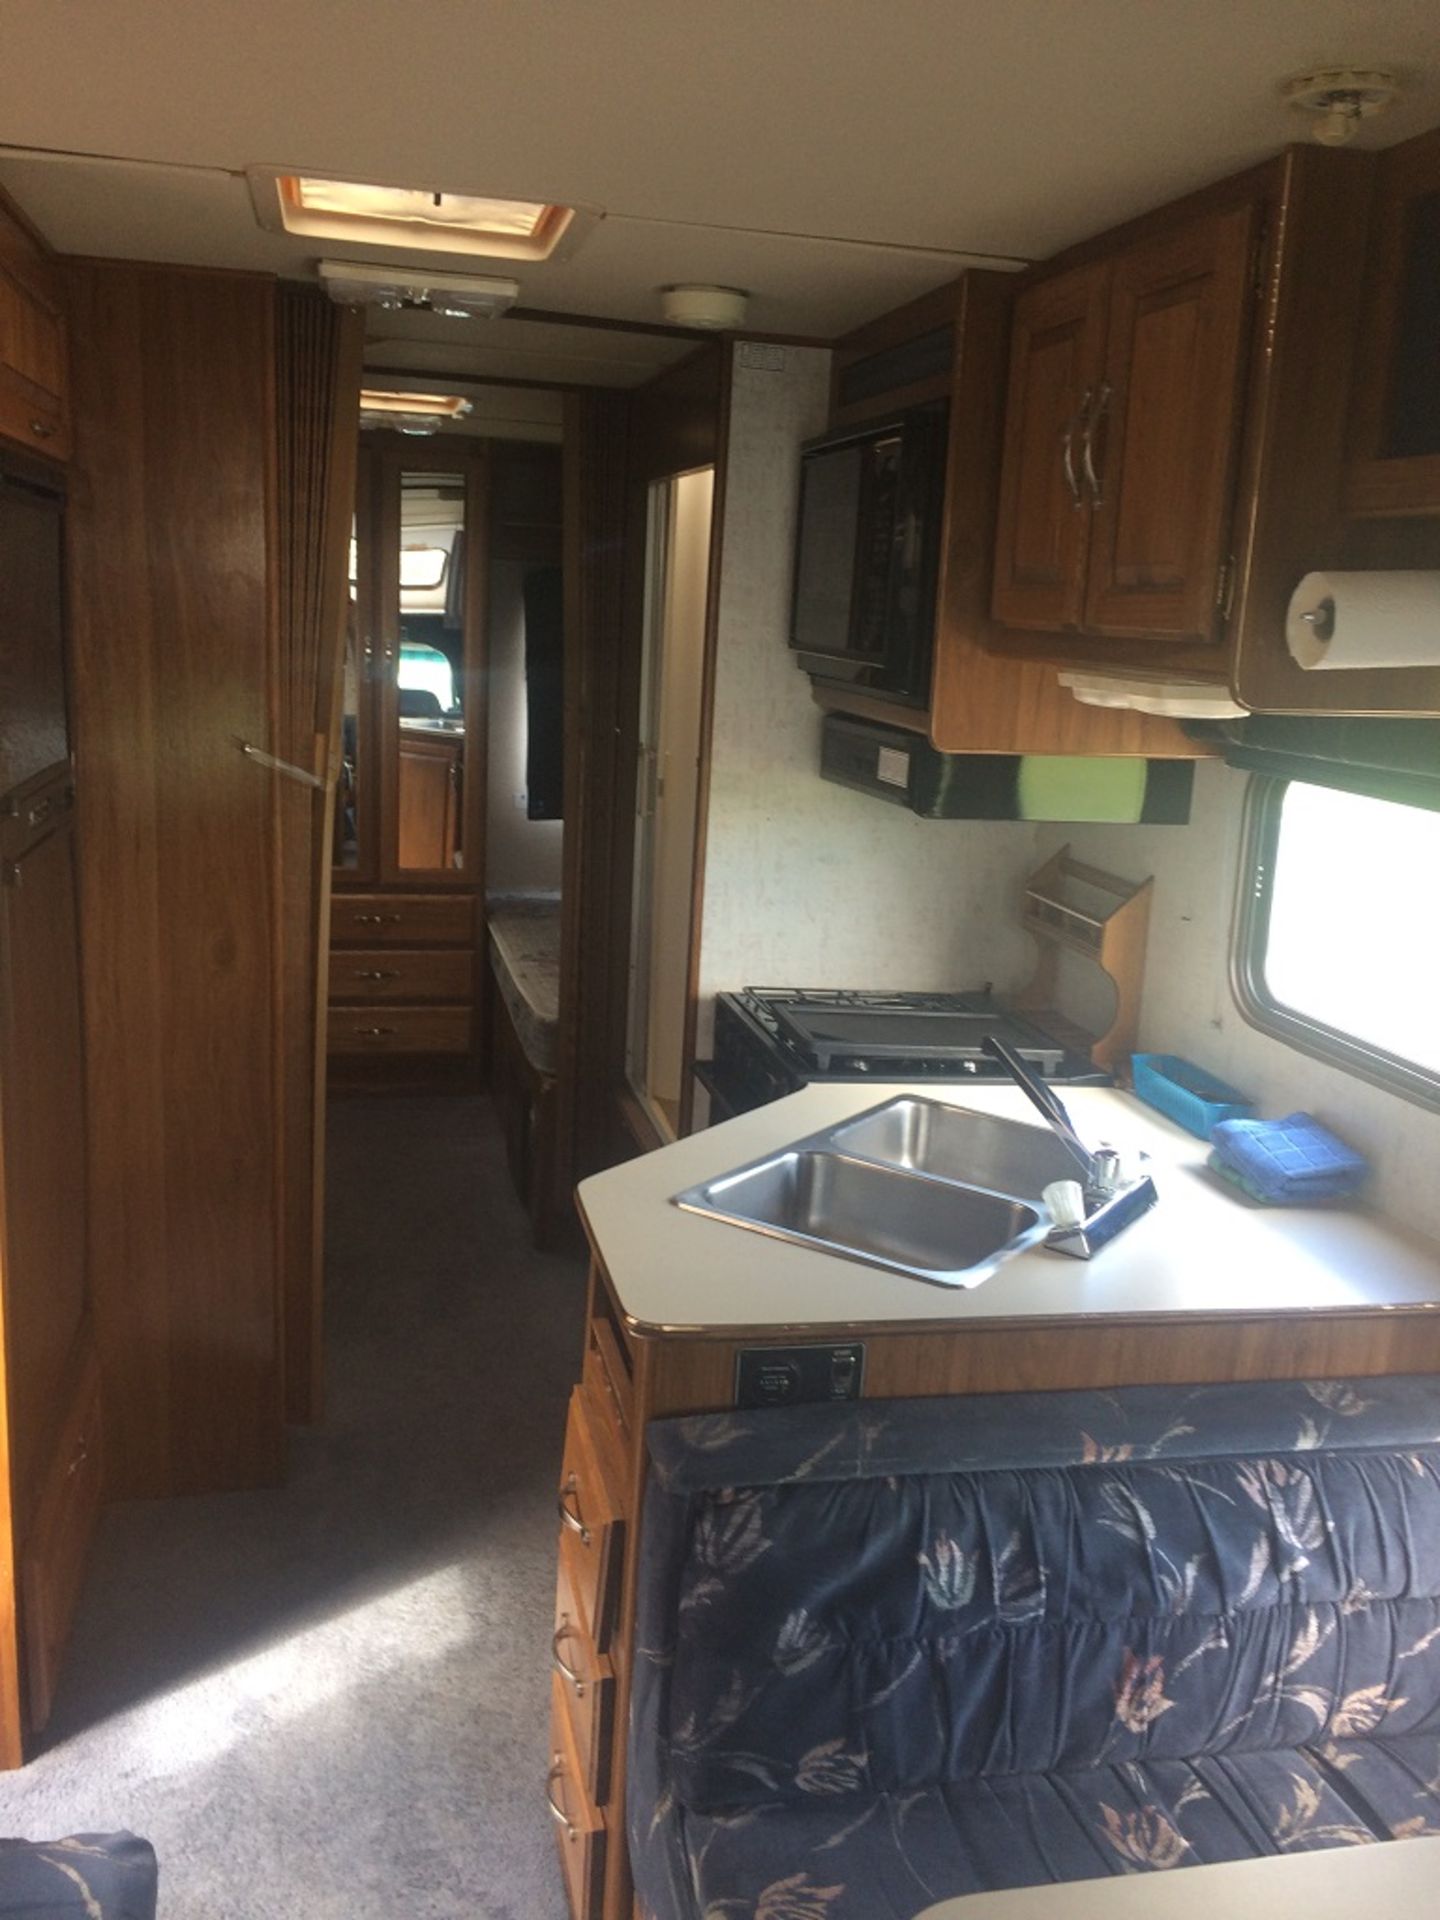 1992 FORD 27' CLASS C MOTOR HOME - SLEEPS 6 W/ BUILT IN GENERATOR, 460 GAS ENGINE, A/C - Image 6 of 9